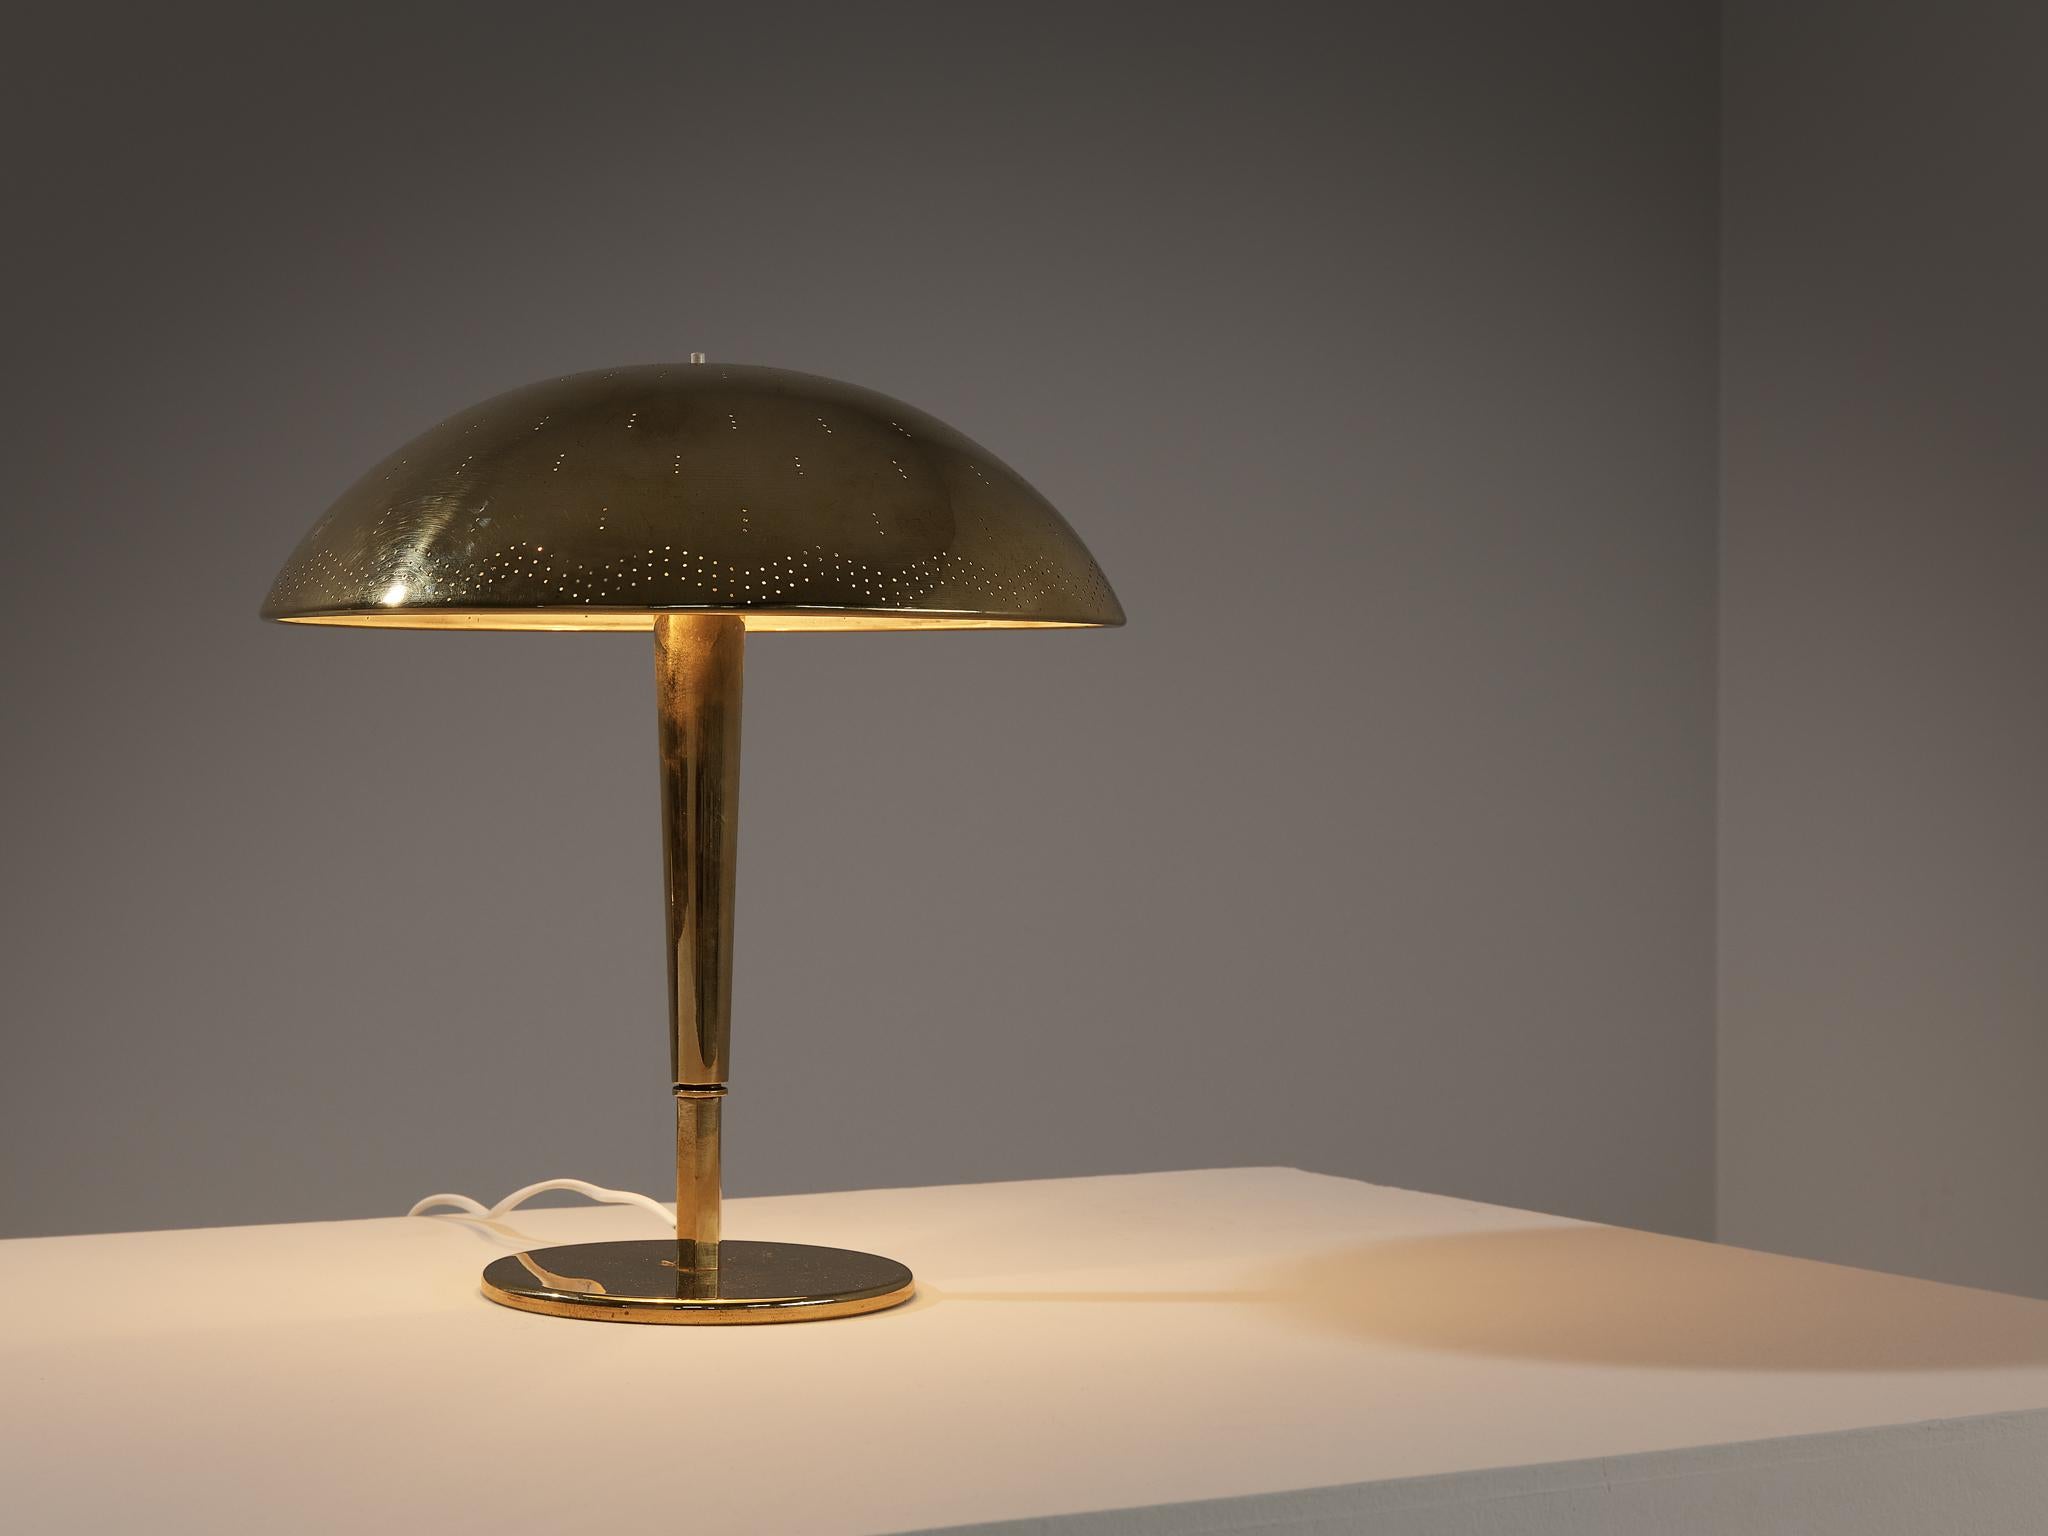 Paavo Tynell for Taito Oy, table lamp, model ‘5061’, brass, Finland, circa 1950

A truly magnificent piece that scores highly on every design aspect: execution, use of materials, craftsmanship, and detail. Paavo Tynell, the master in the fields of